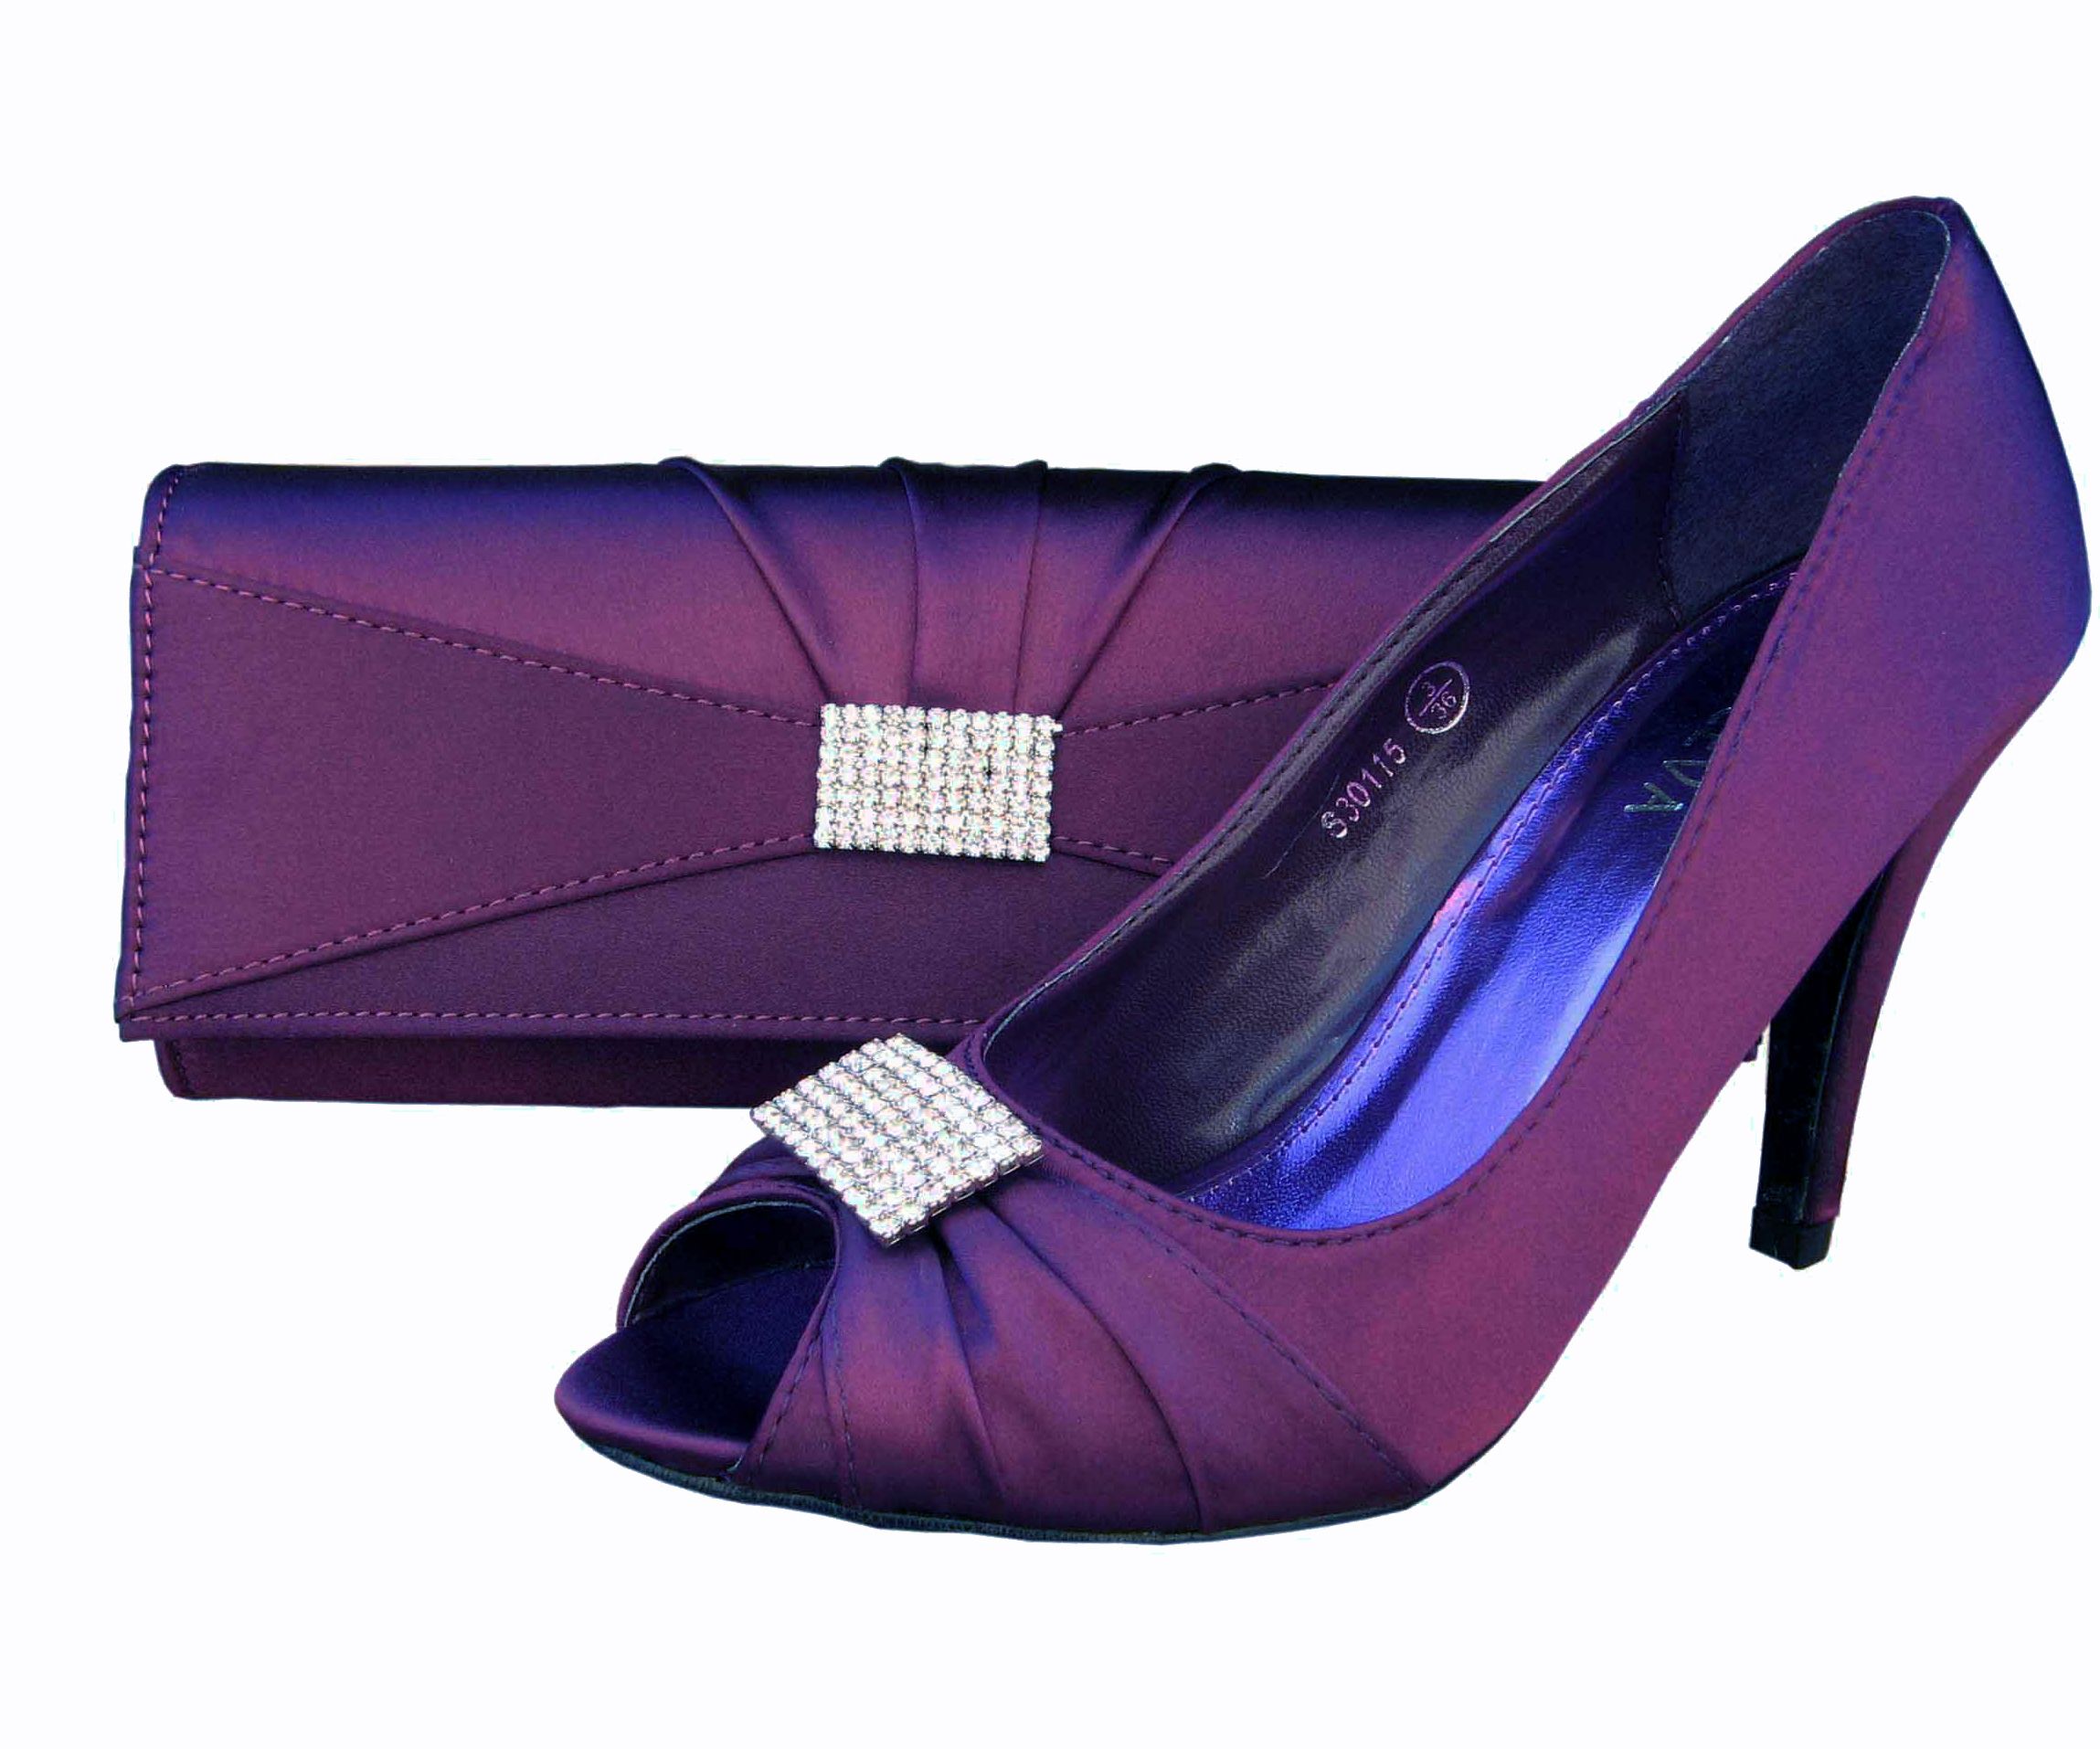 Bering Strait Need how to use Purple Evening Clutch Bag | Sole Divas